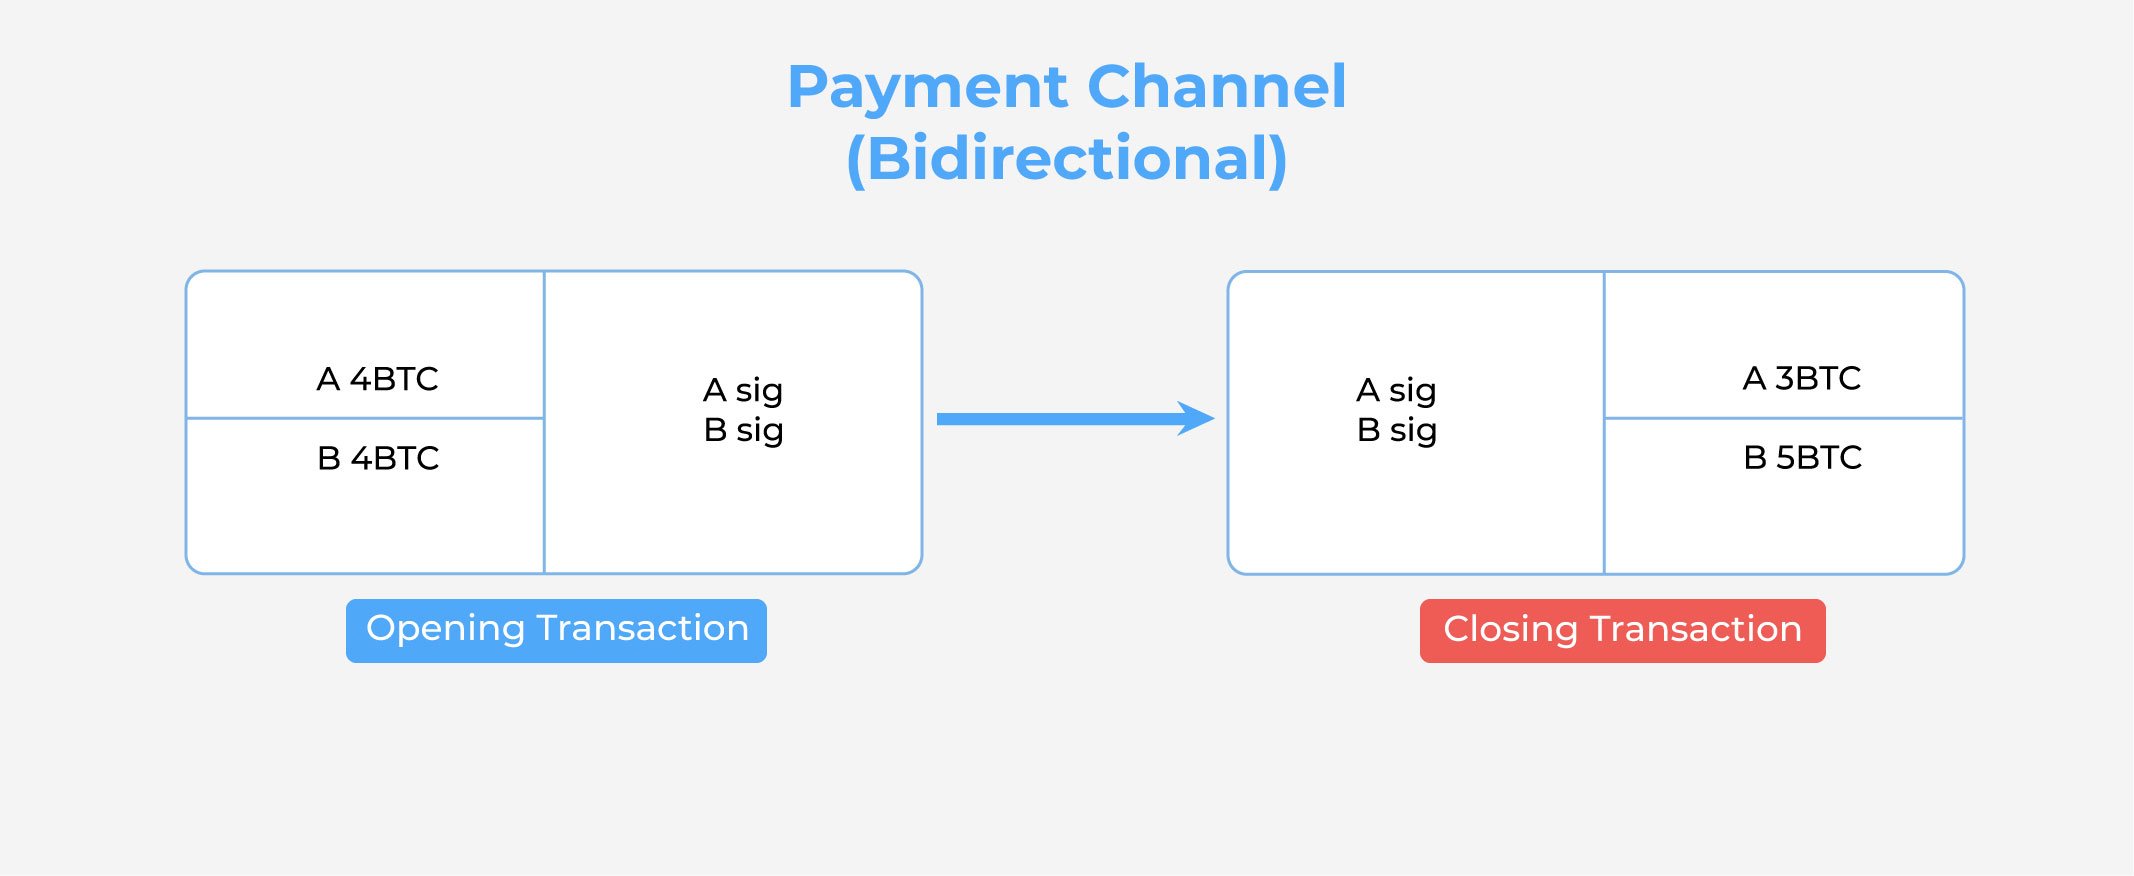 How do payment channels work?